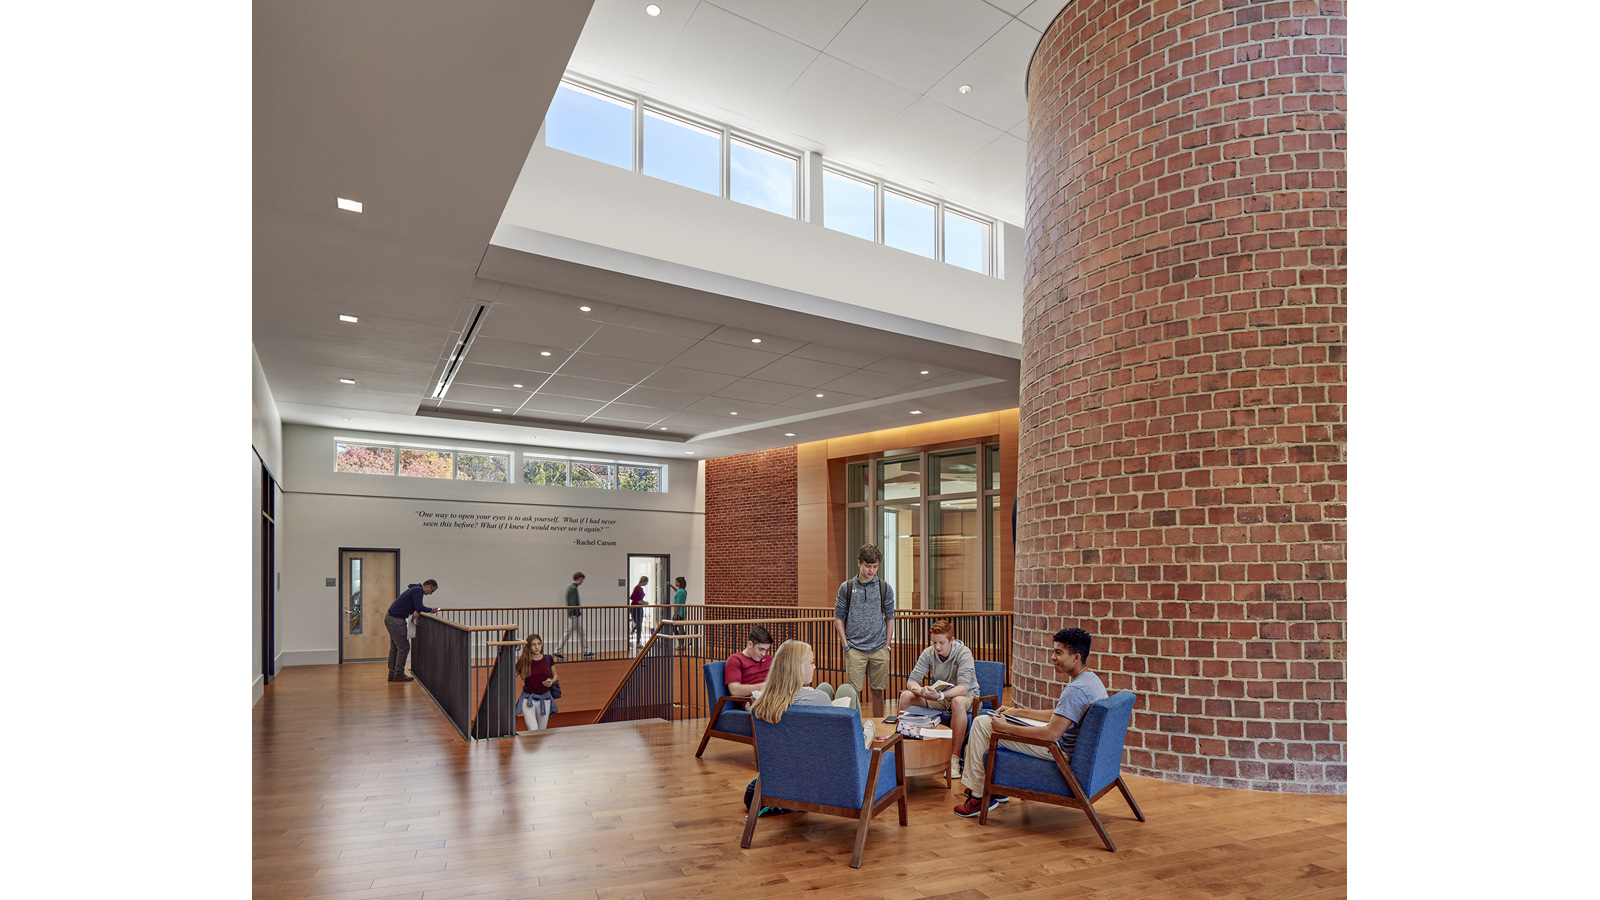 Middlesex Rachel Carson Music and Campus Center, students sit around the old brick chimney